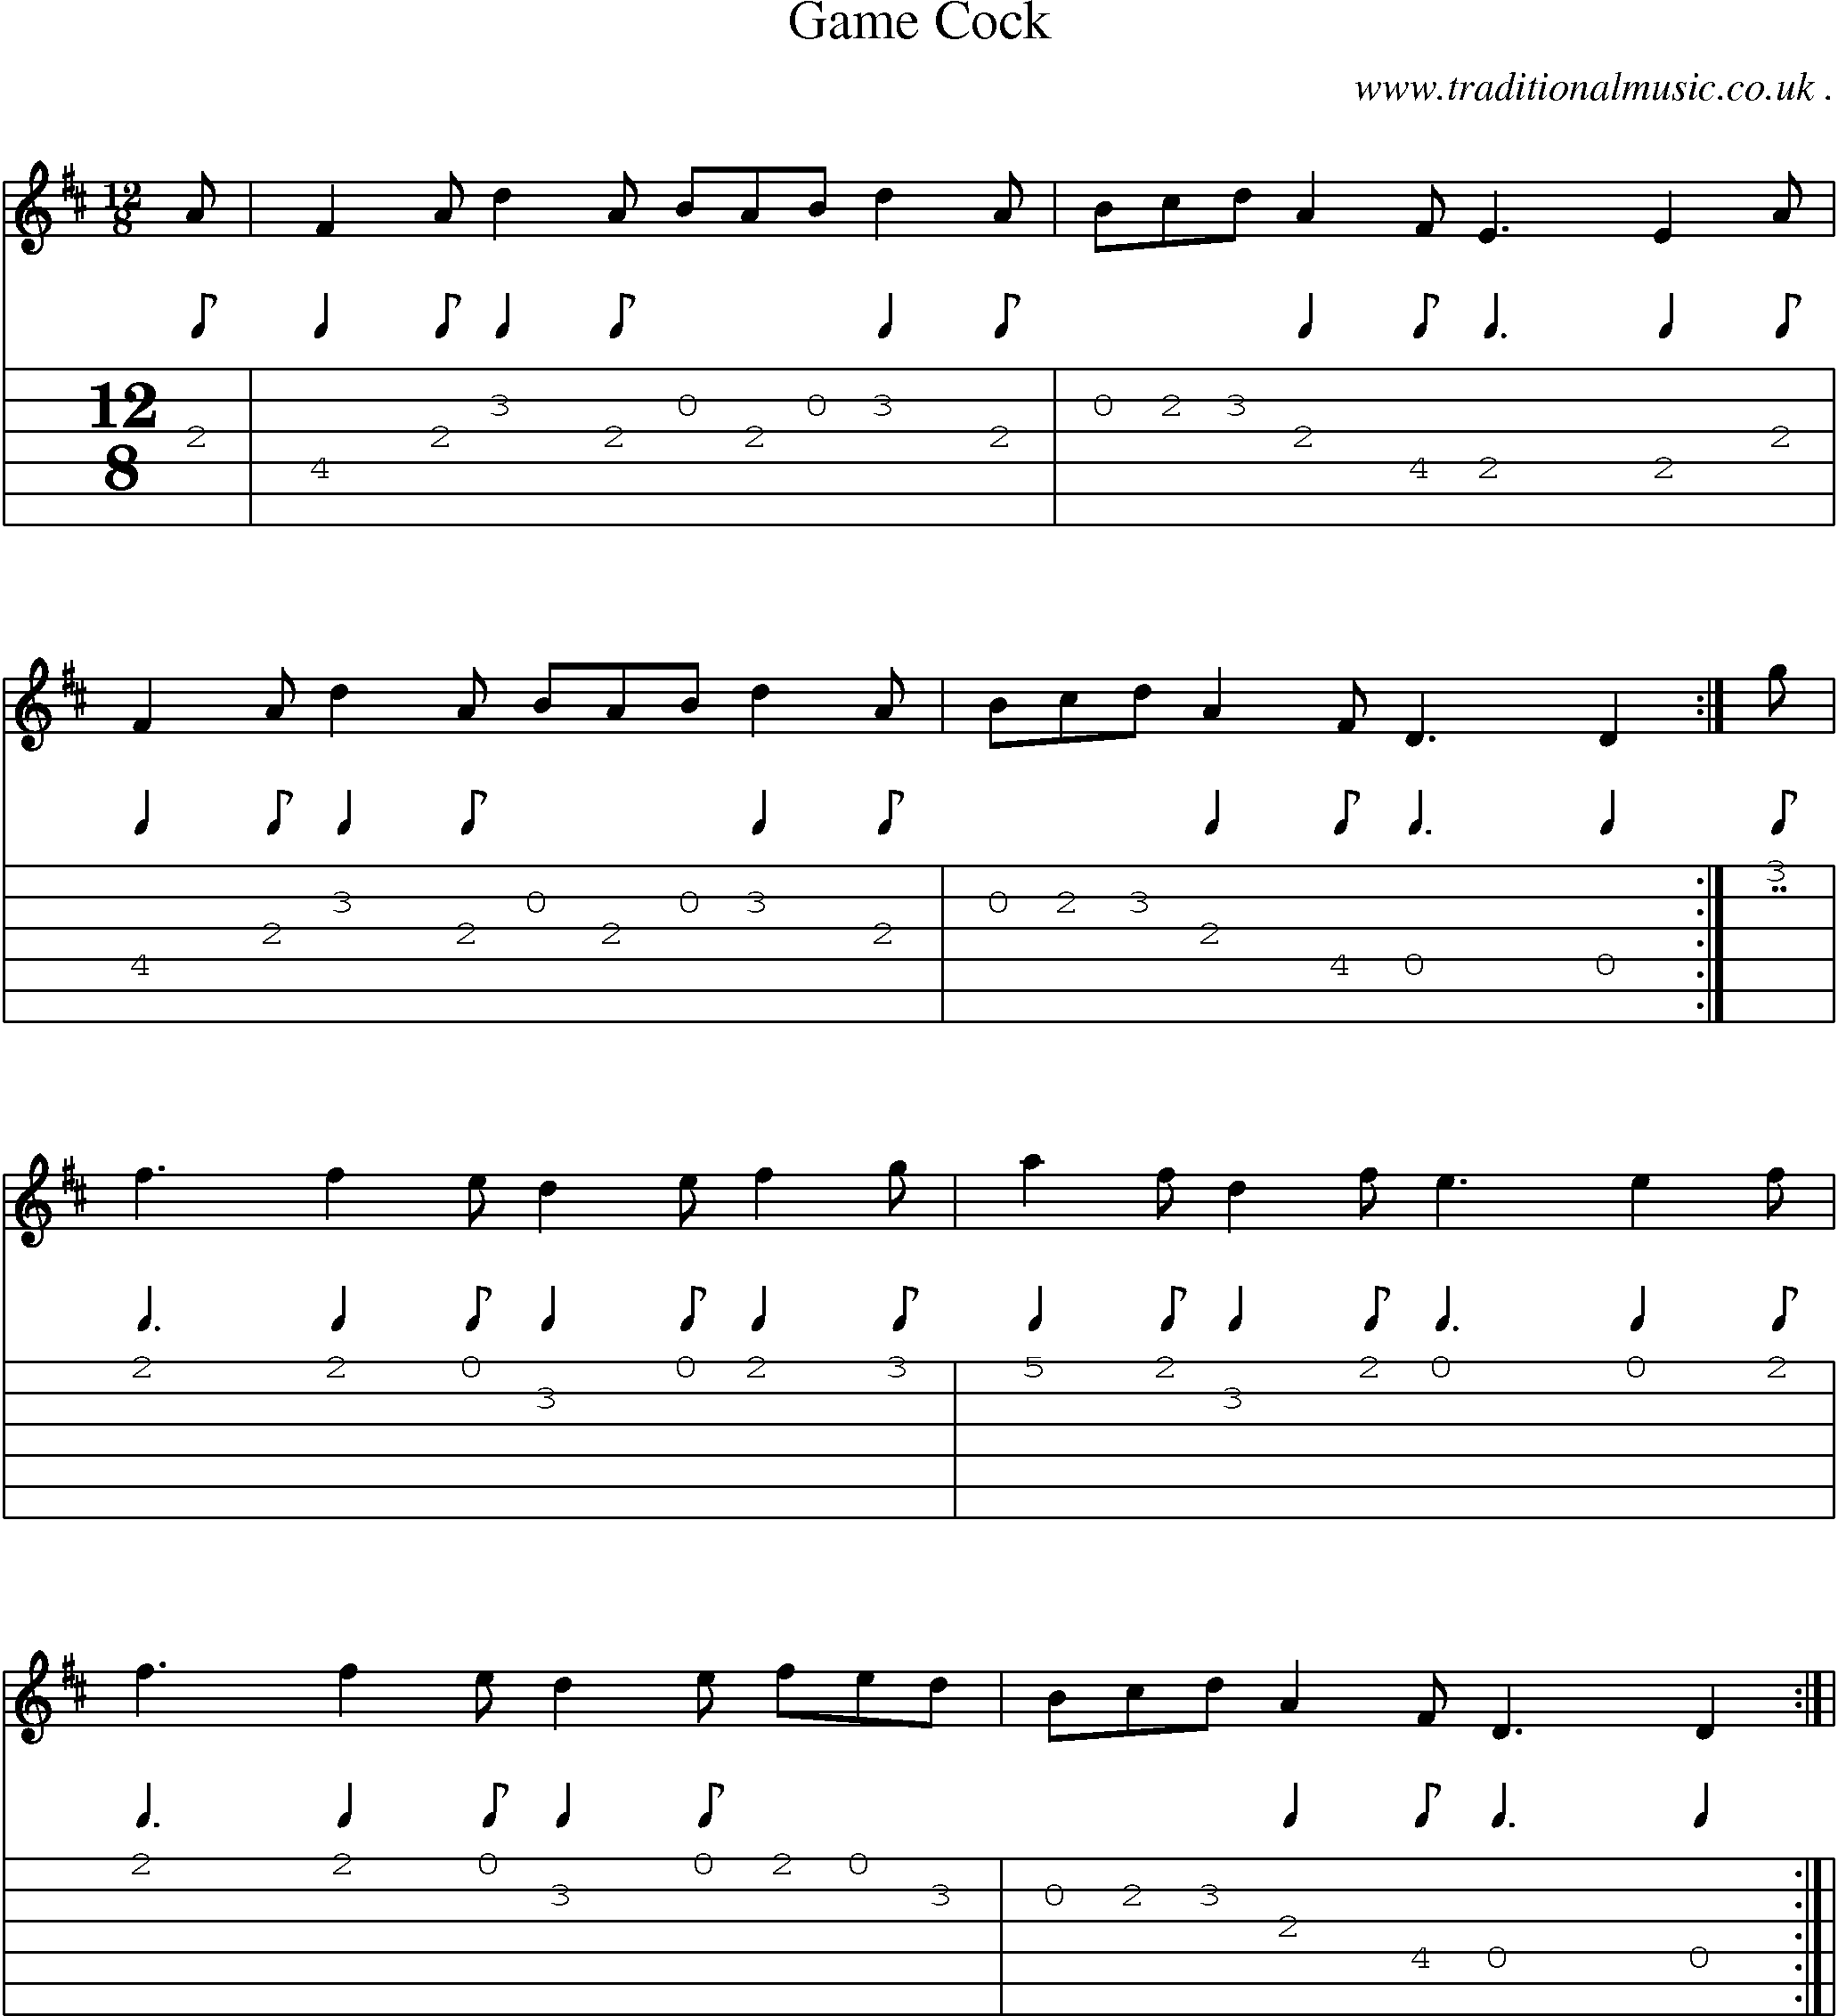 Sheet-Music and Guitar Tabs for Game Cock